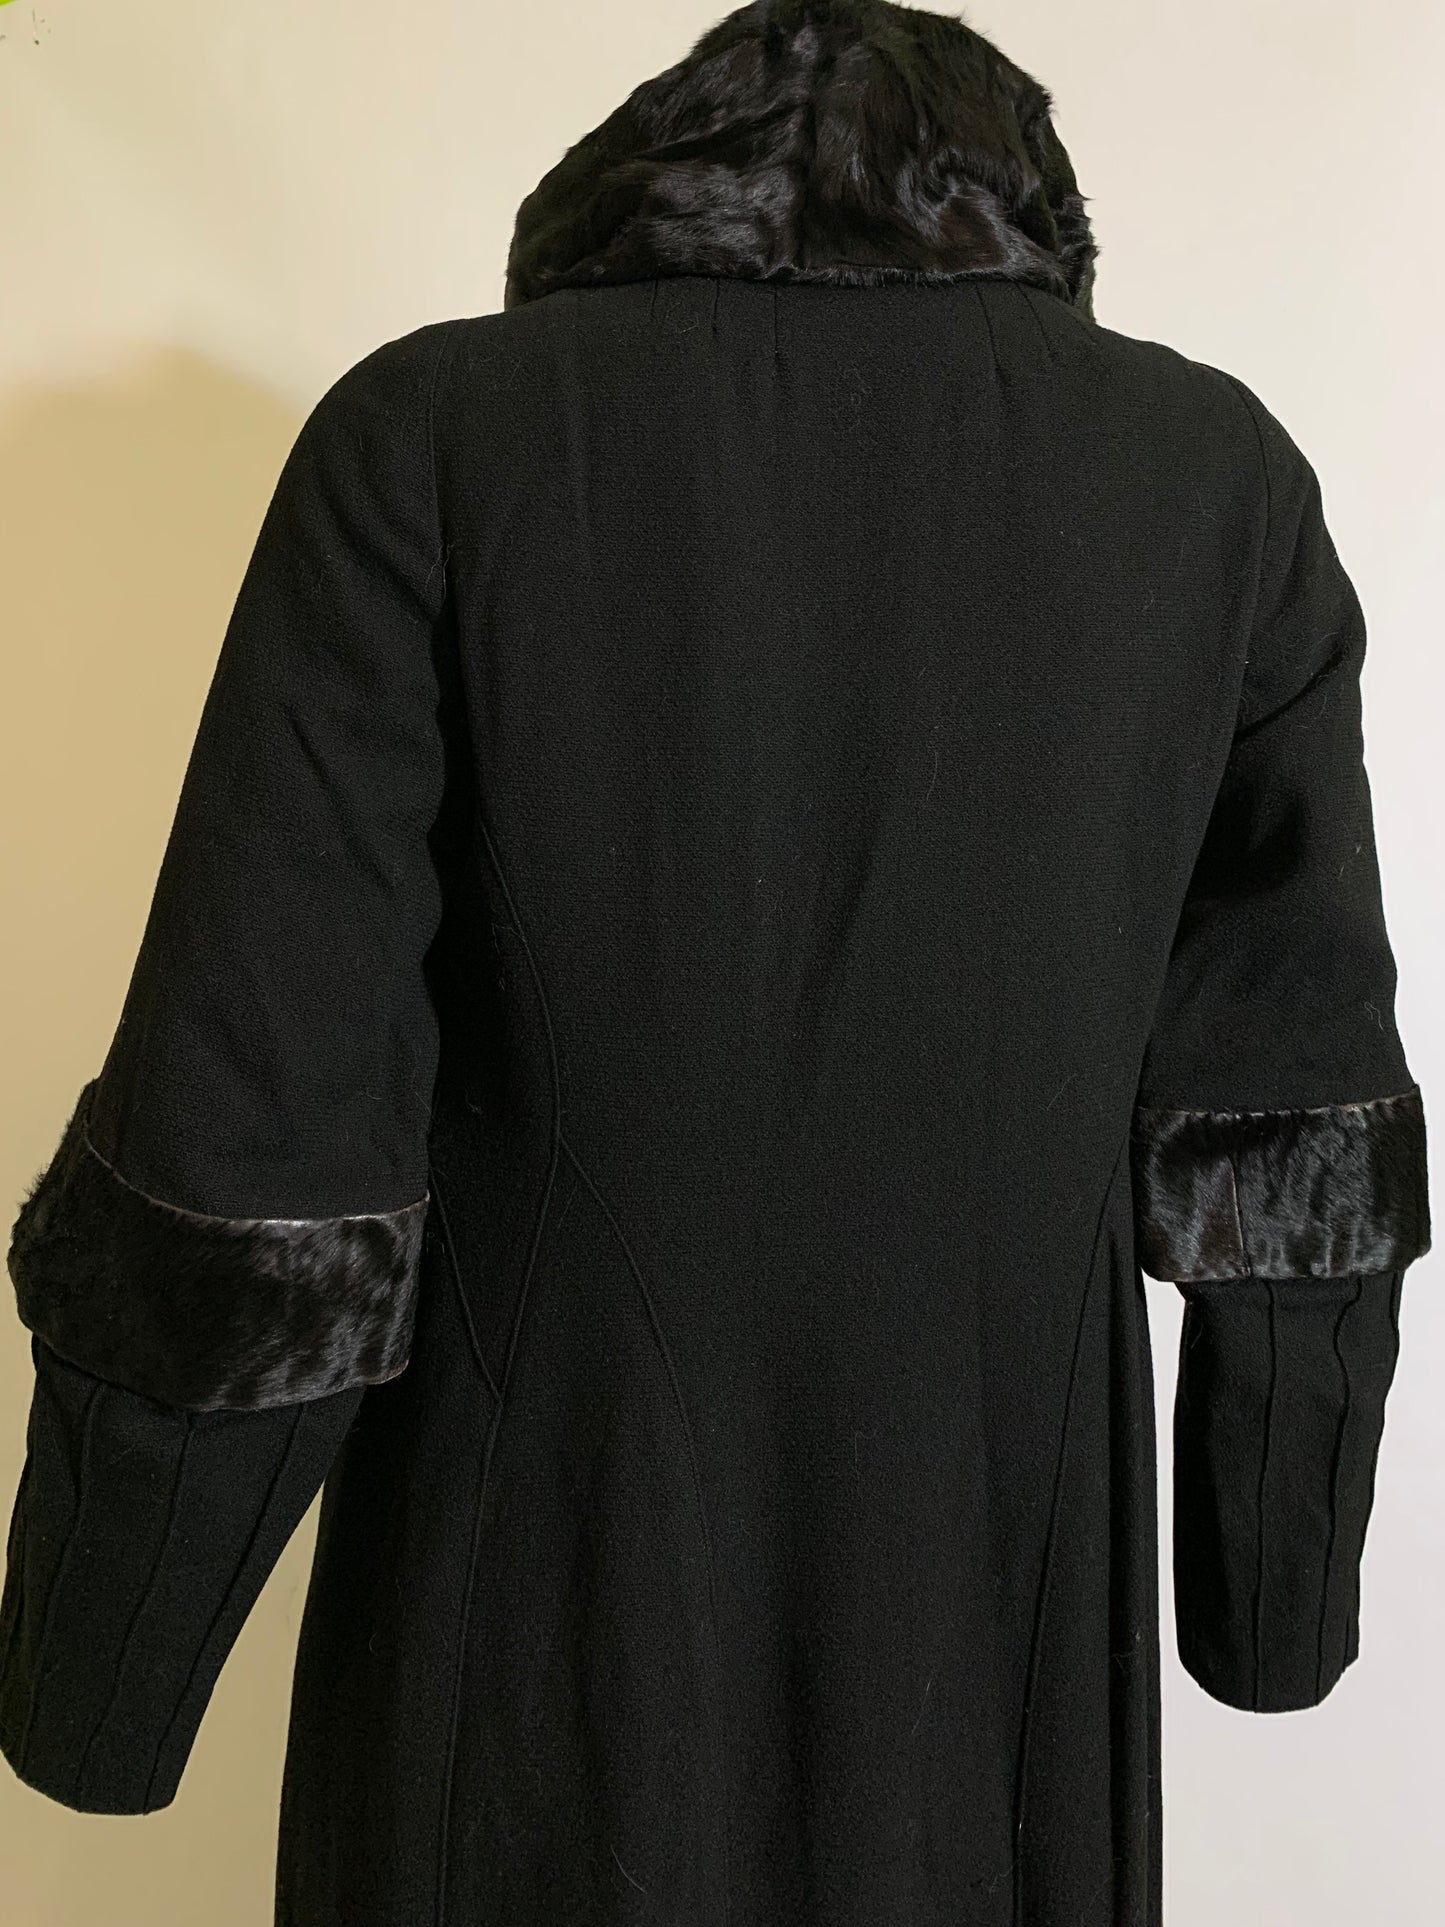 Glamorous Black Silk Coat with Sculpted Black Fur Stand Up Collar and Trim circa 1920s